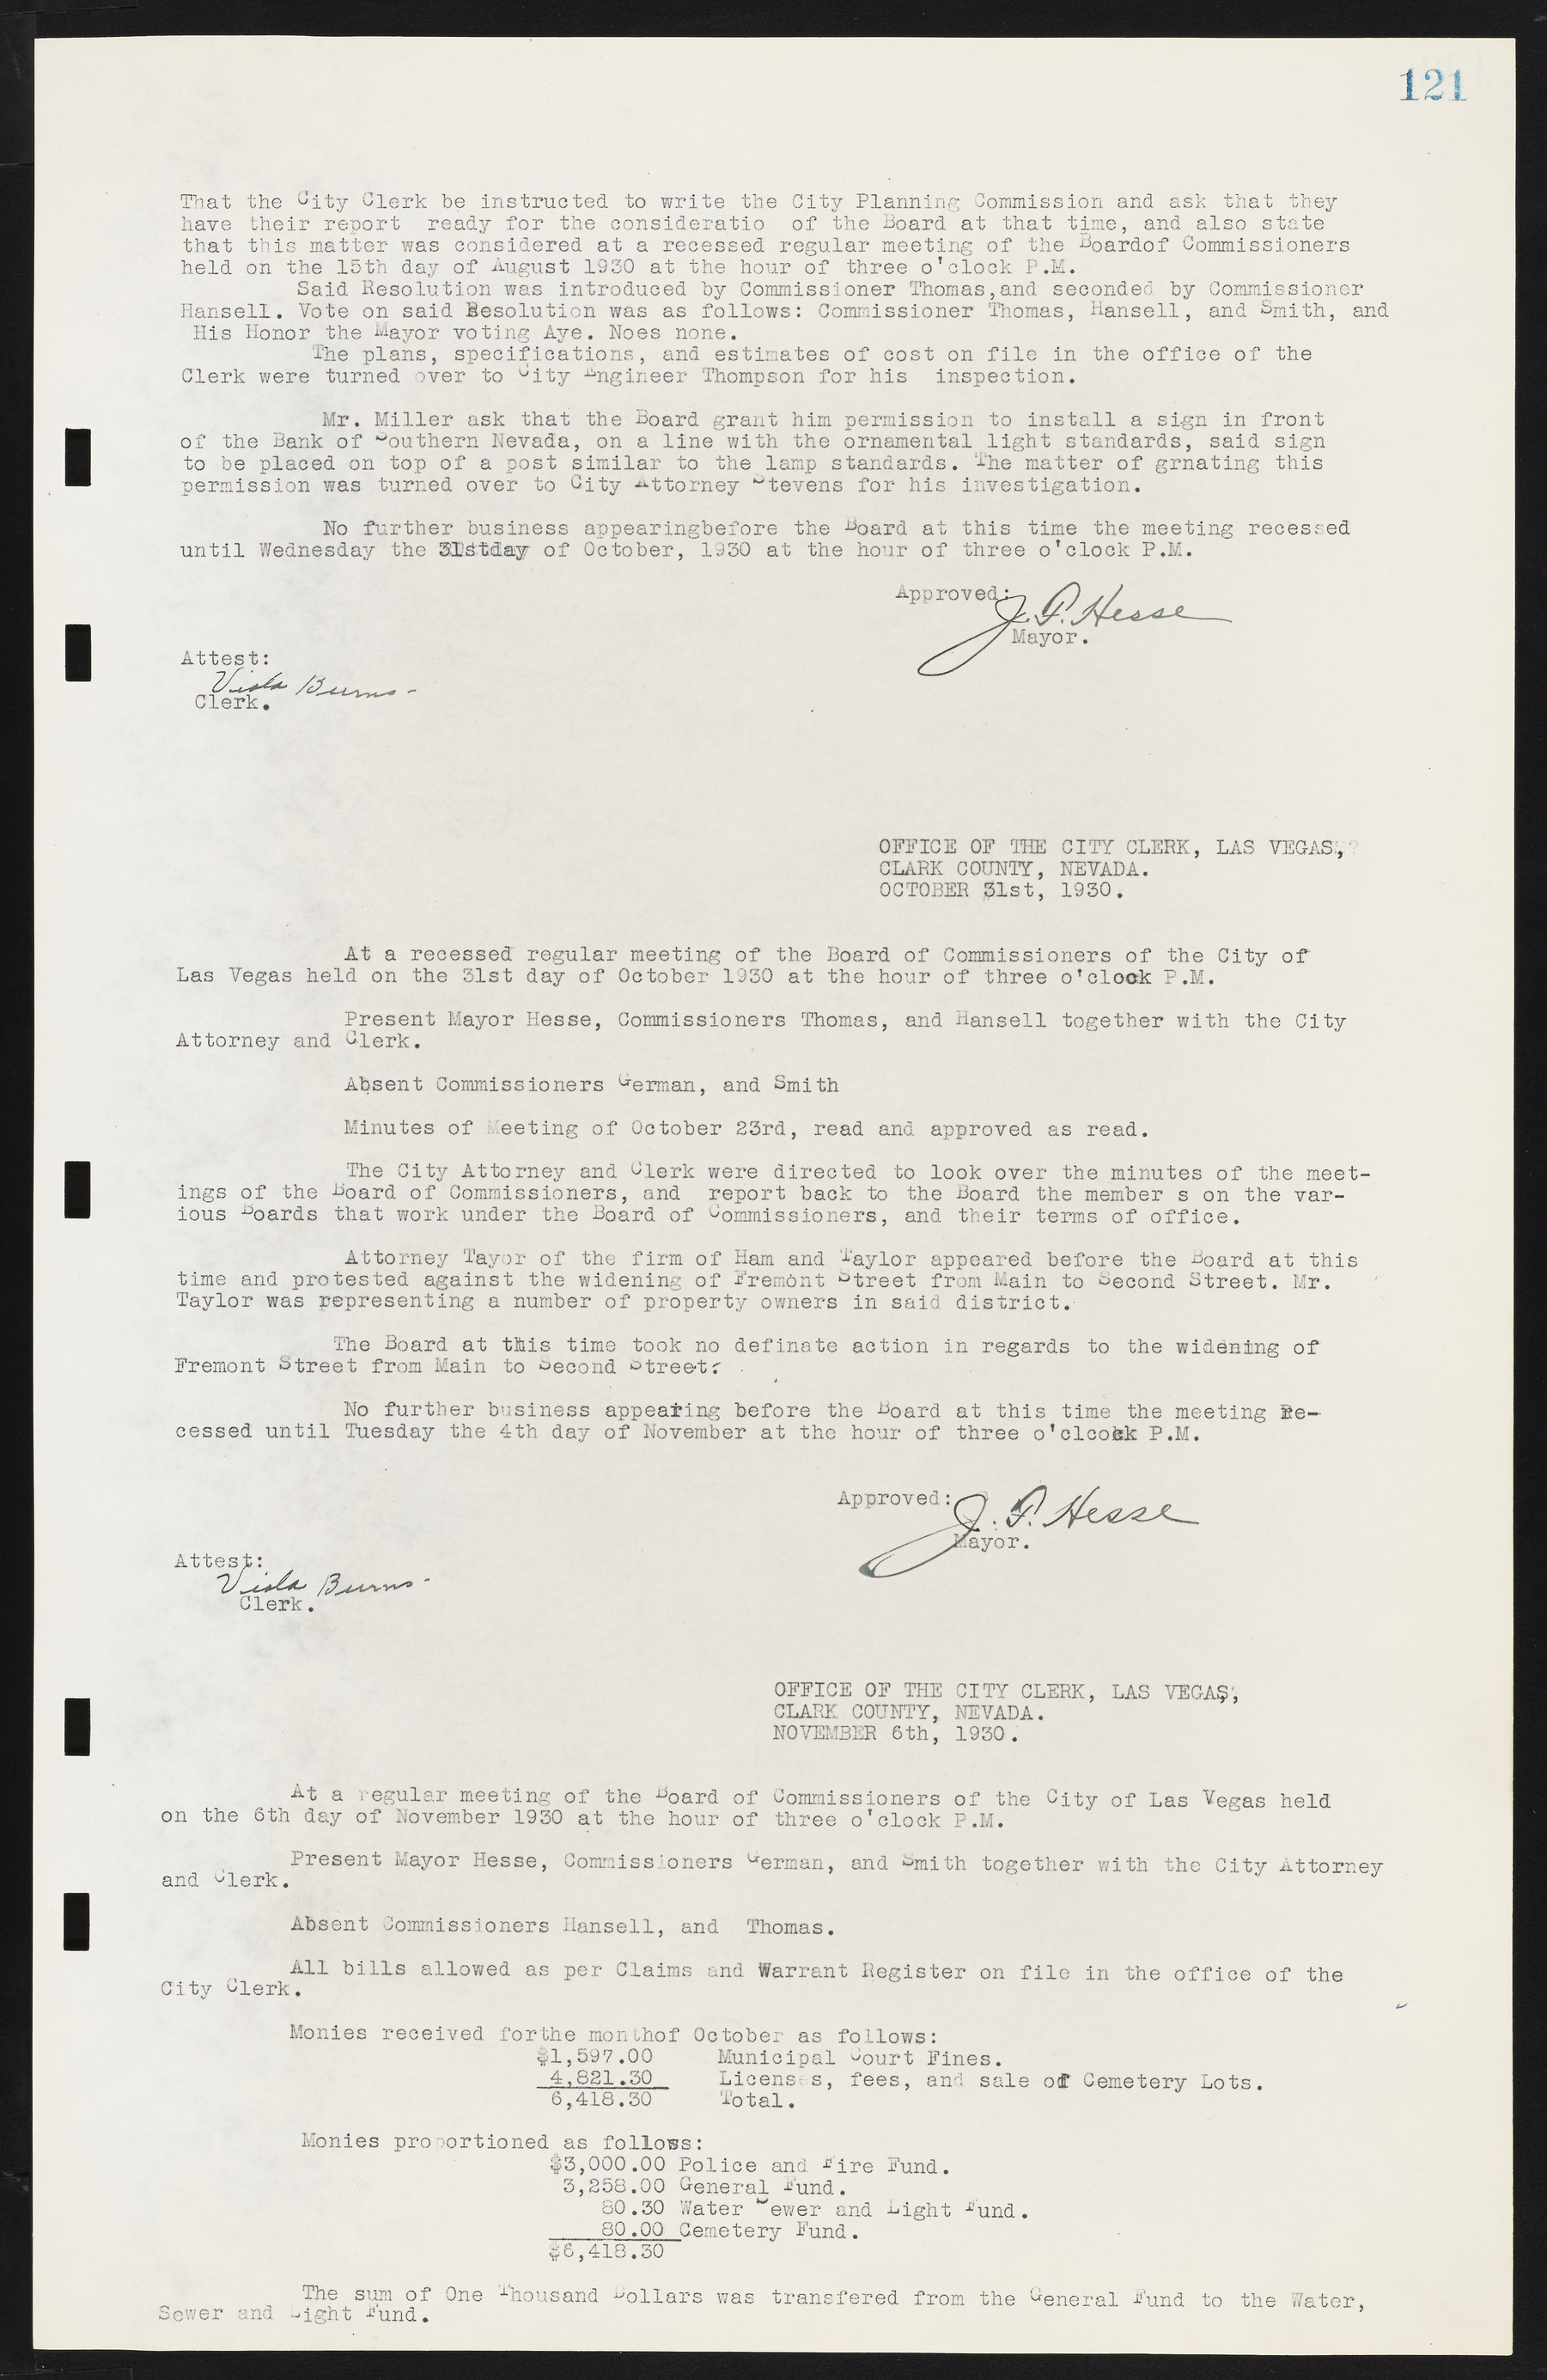 Las Vegas City Commission Minutes, May 14, 1929 to February 11, 1937, lvc000003-127